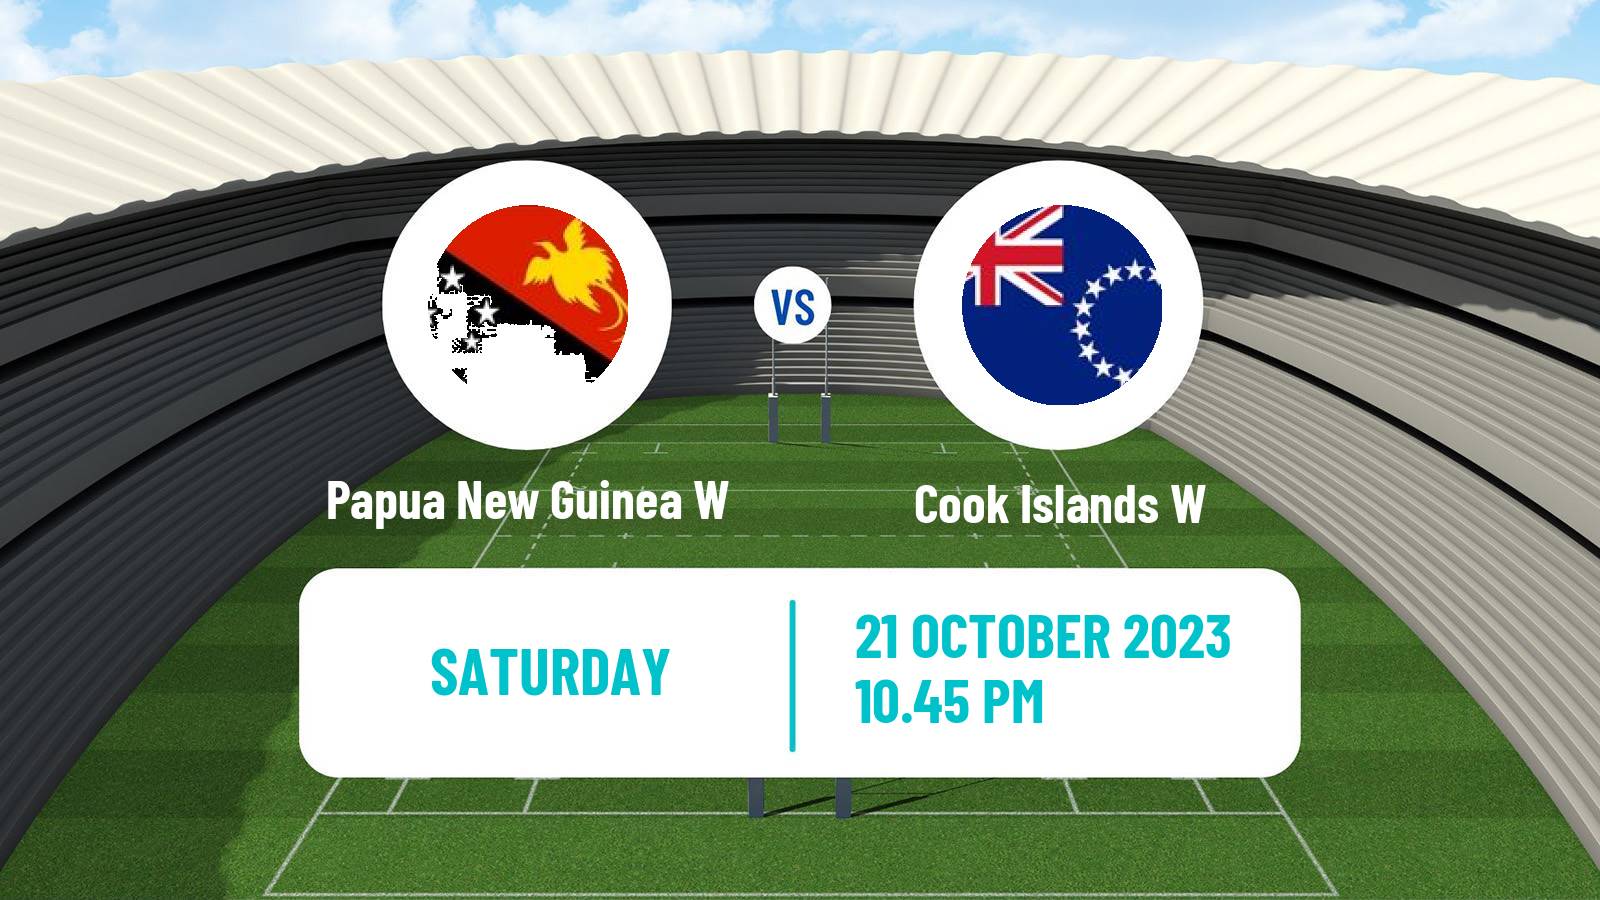 Rugby league Pacific Championships Rugby League Women Papua New Guinea W - Cook Islands W